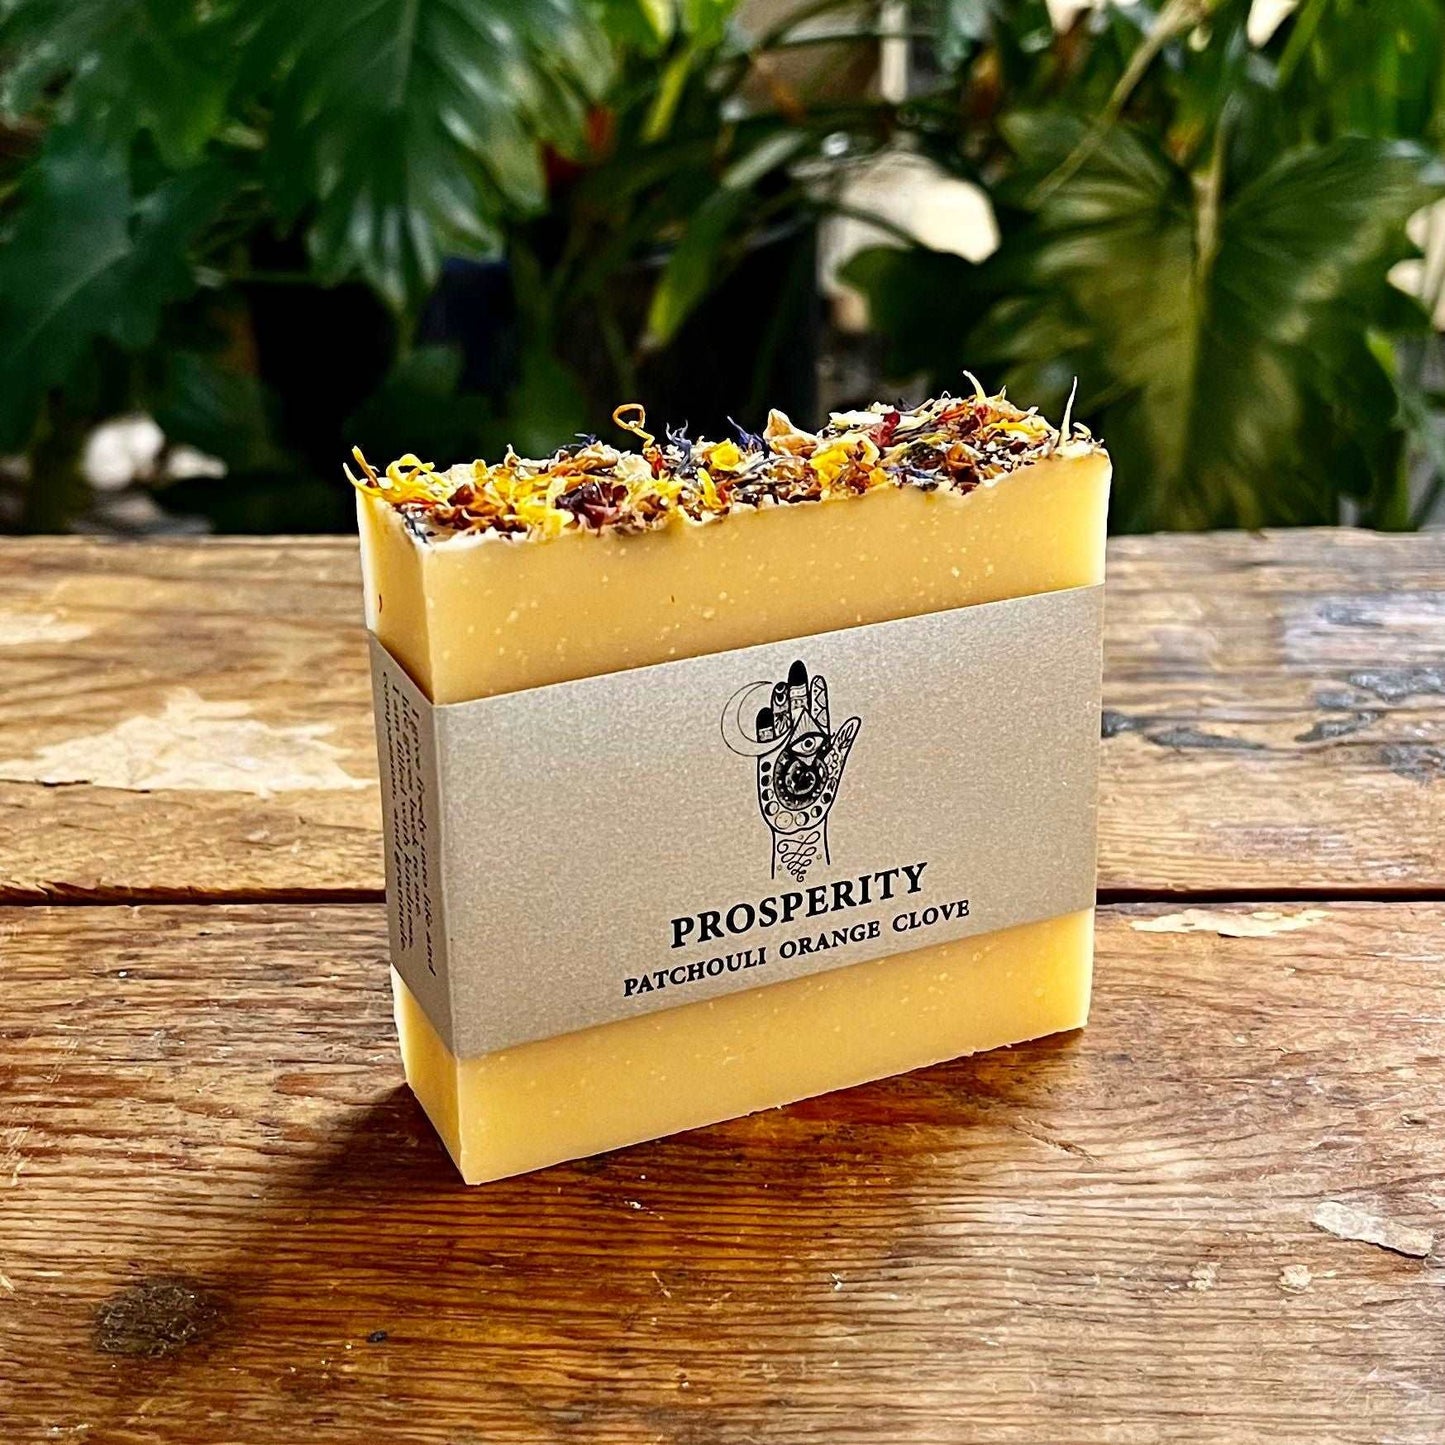 Handmade Cold Pressed Goat's Milk Soap with Local Colorado Goat's Milk - Prosperity Soap with Organic Essential Oils of Patchouli, Orange, and Clove for Abundance and Manifesting Goals, Topped with Organic Floral Botanicals.